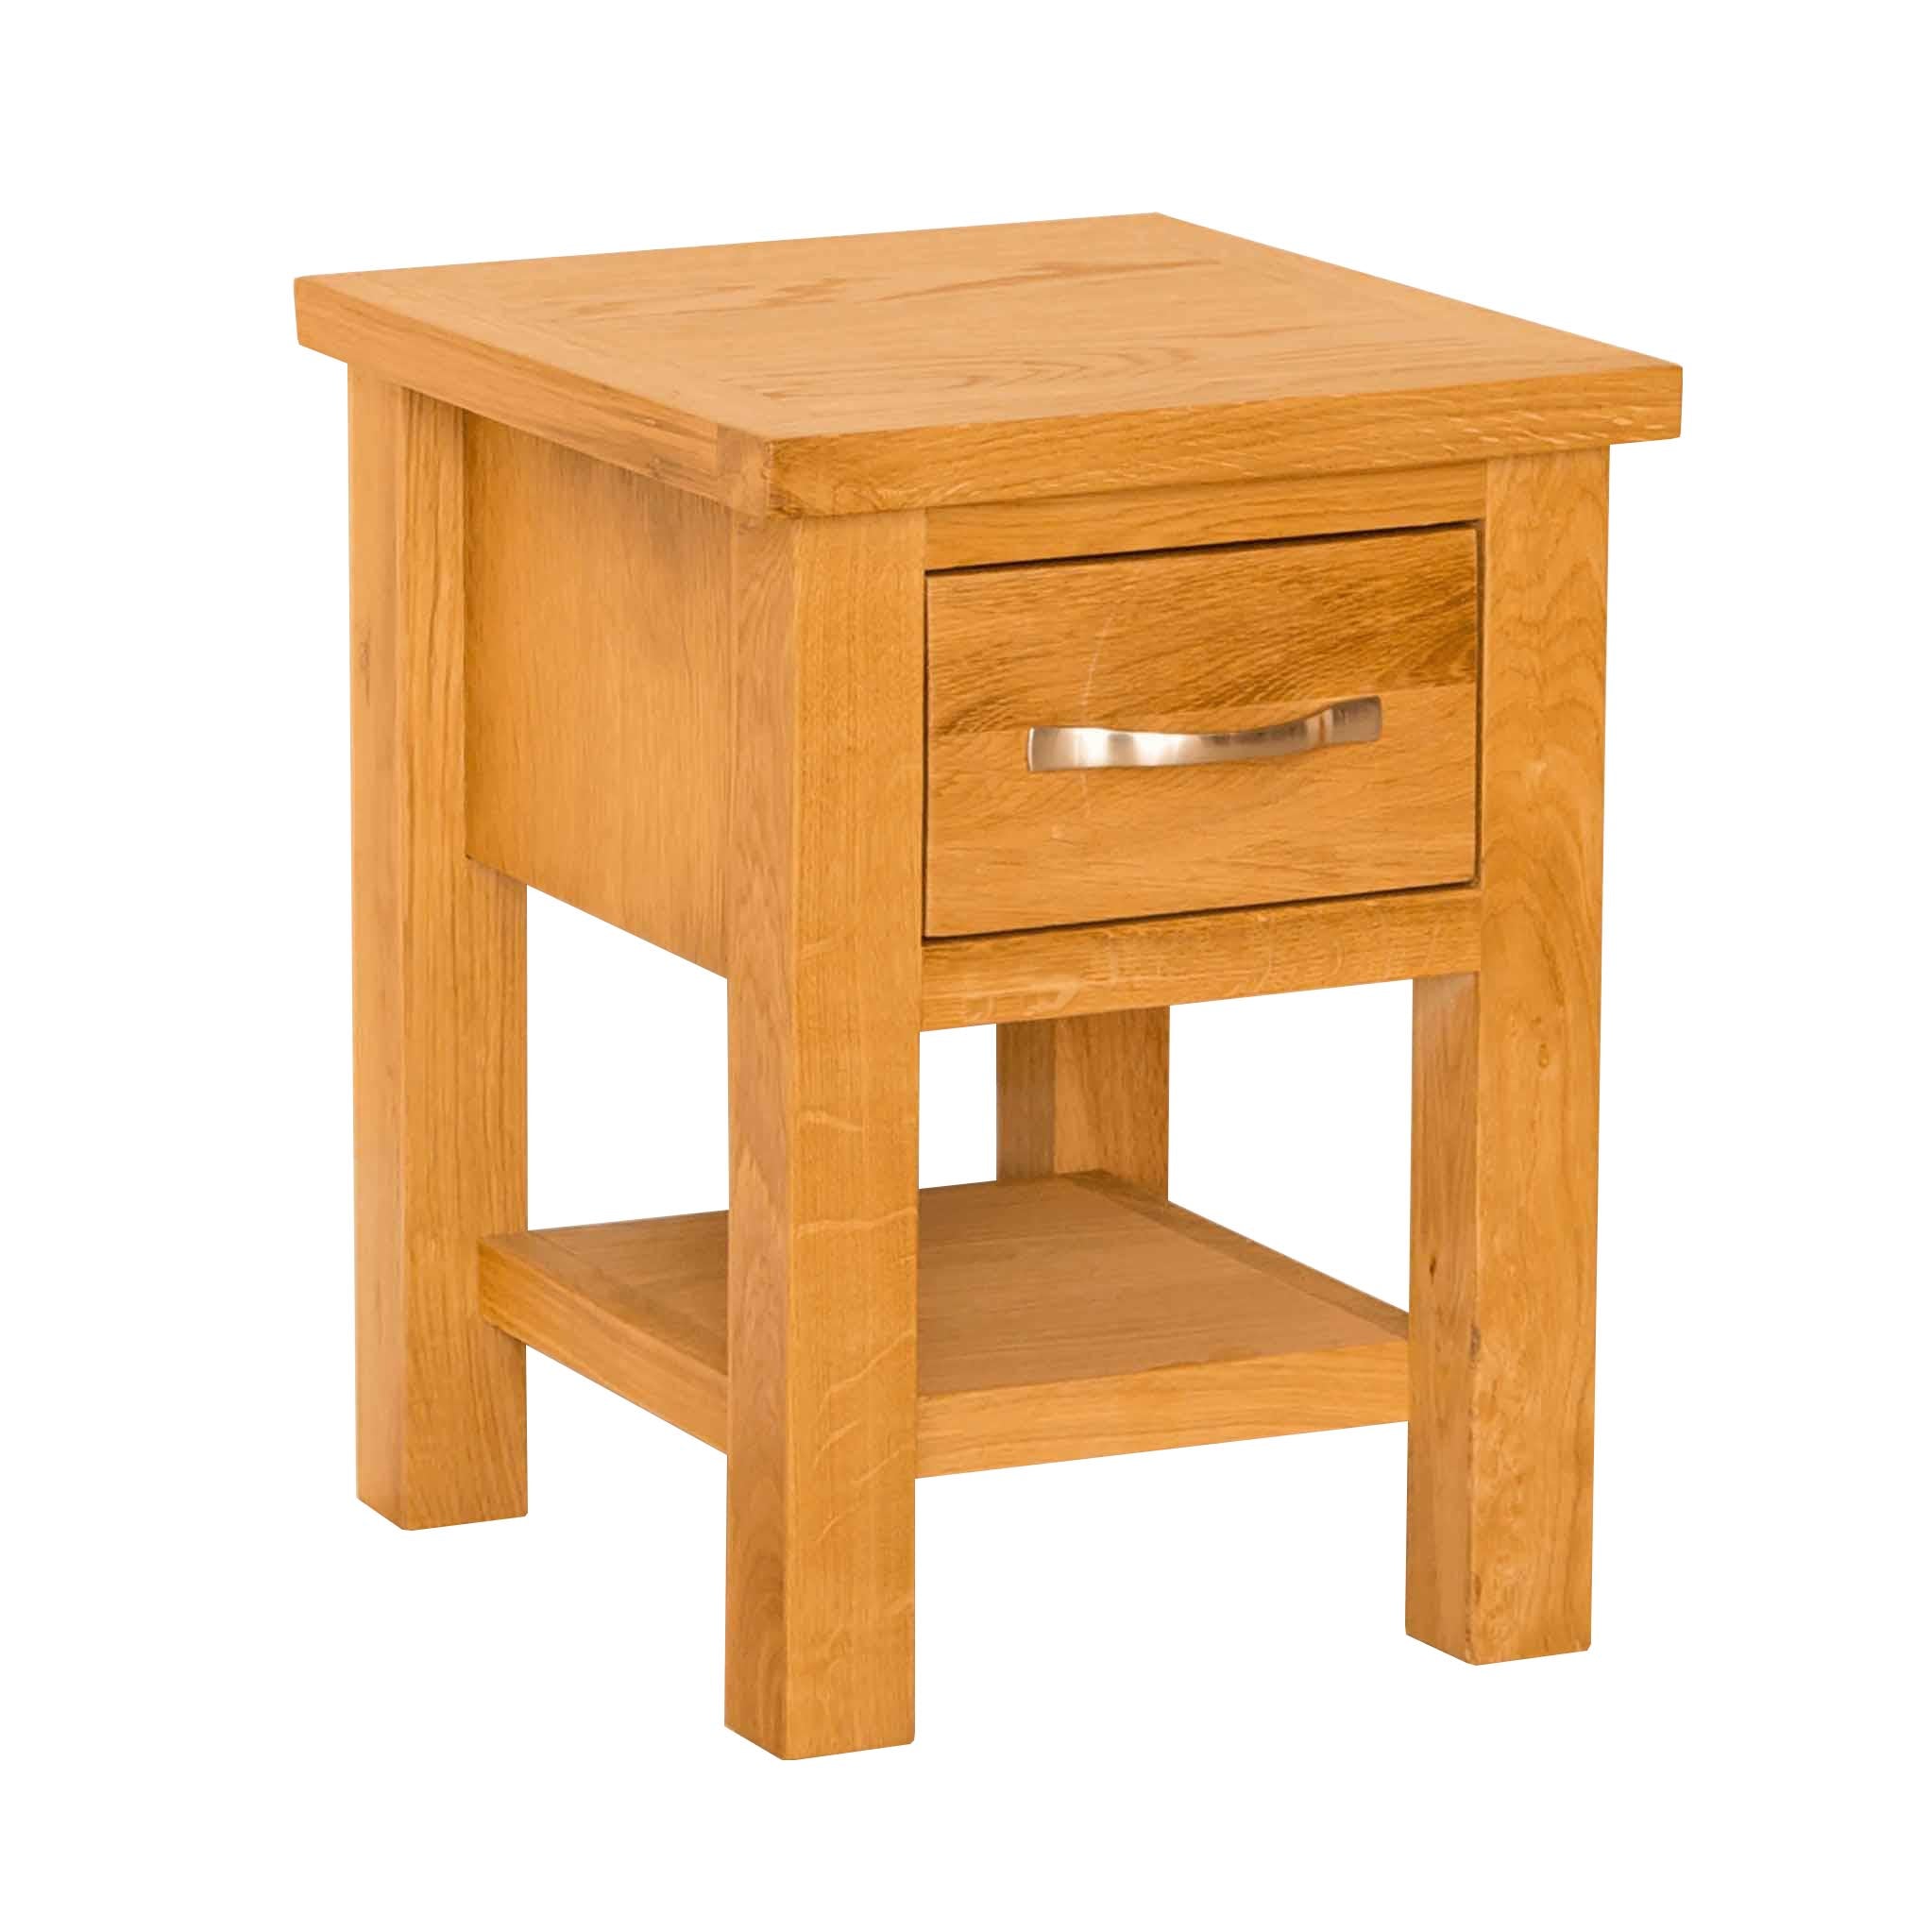 Newlyn Oak Lamp Table With Drawer Solid Quality Wood Light Oak